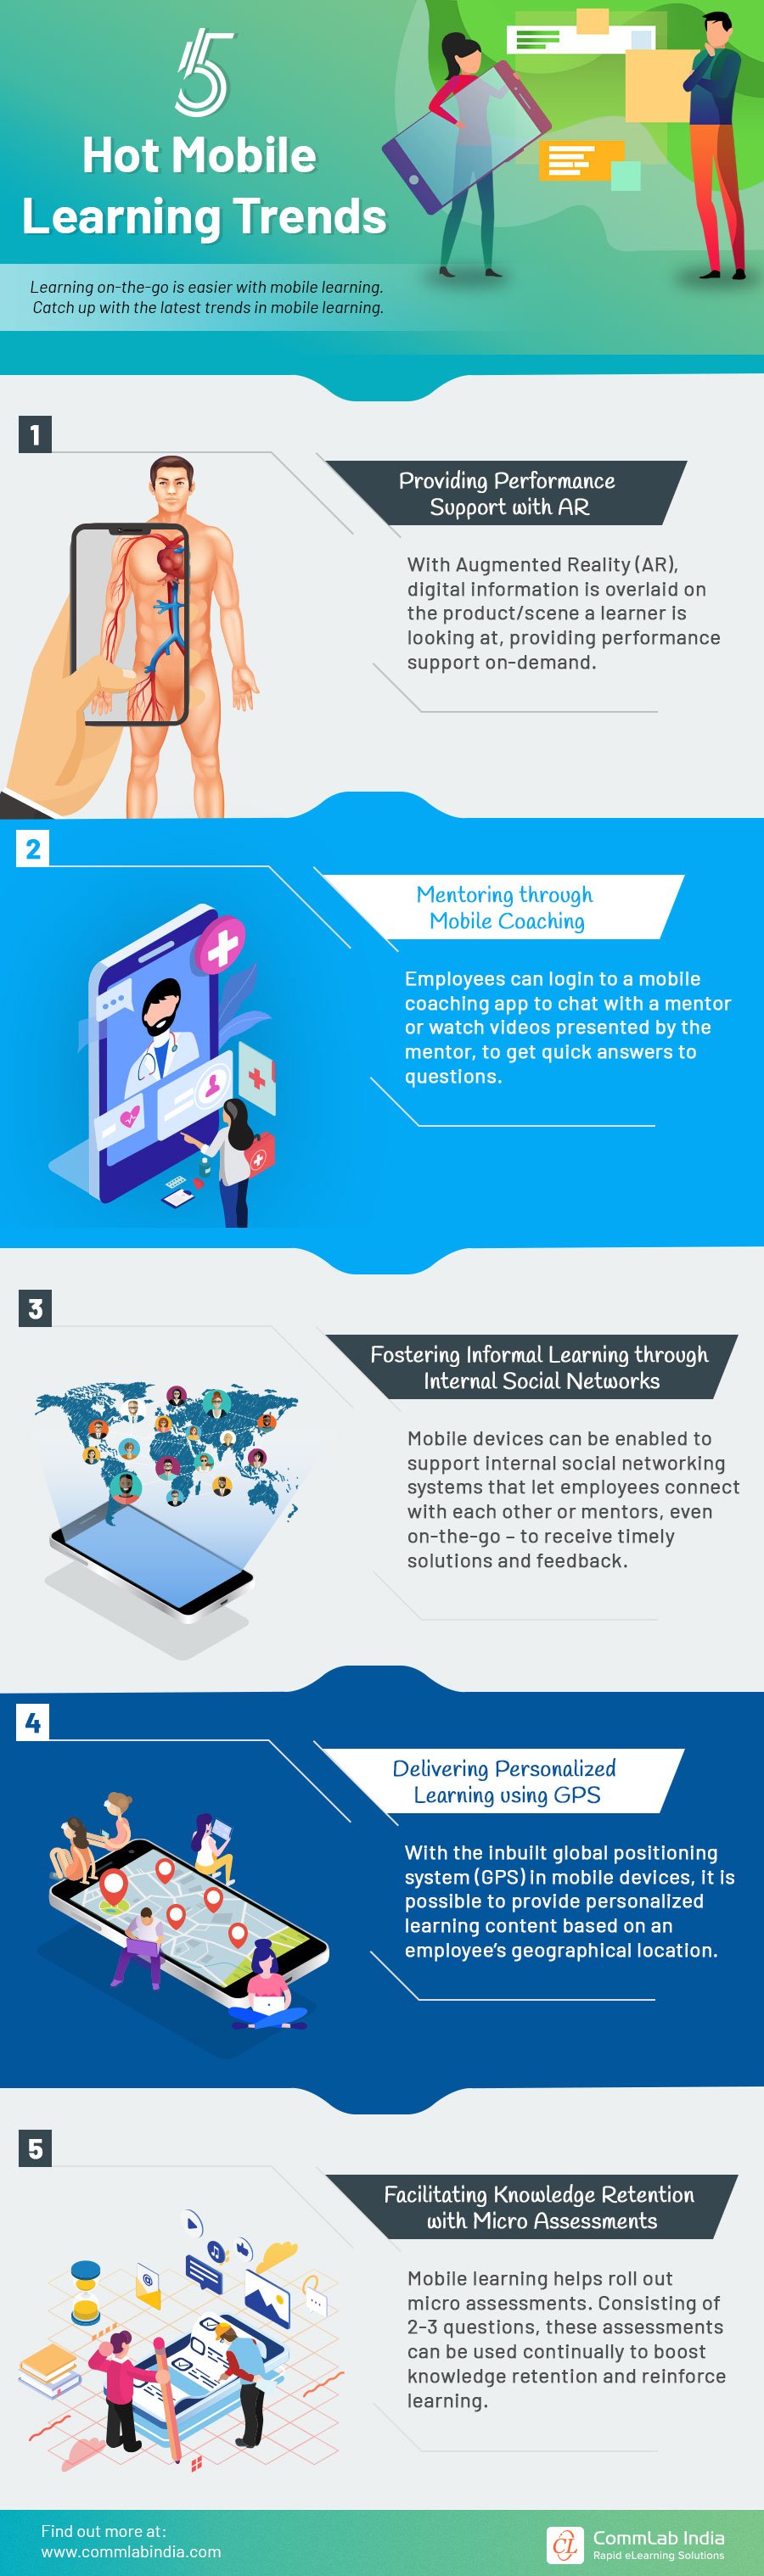 5 Hot Mobile Learning Trends [Infographic]